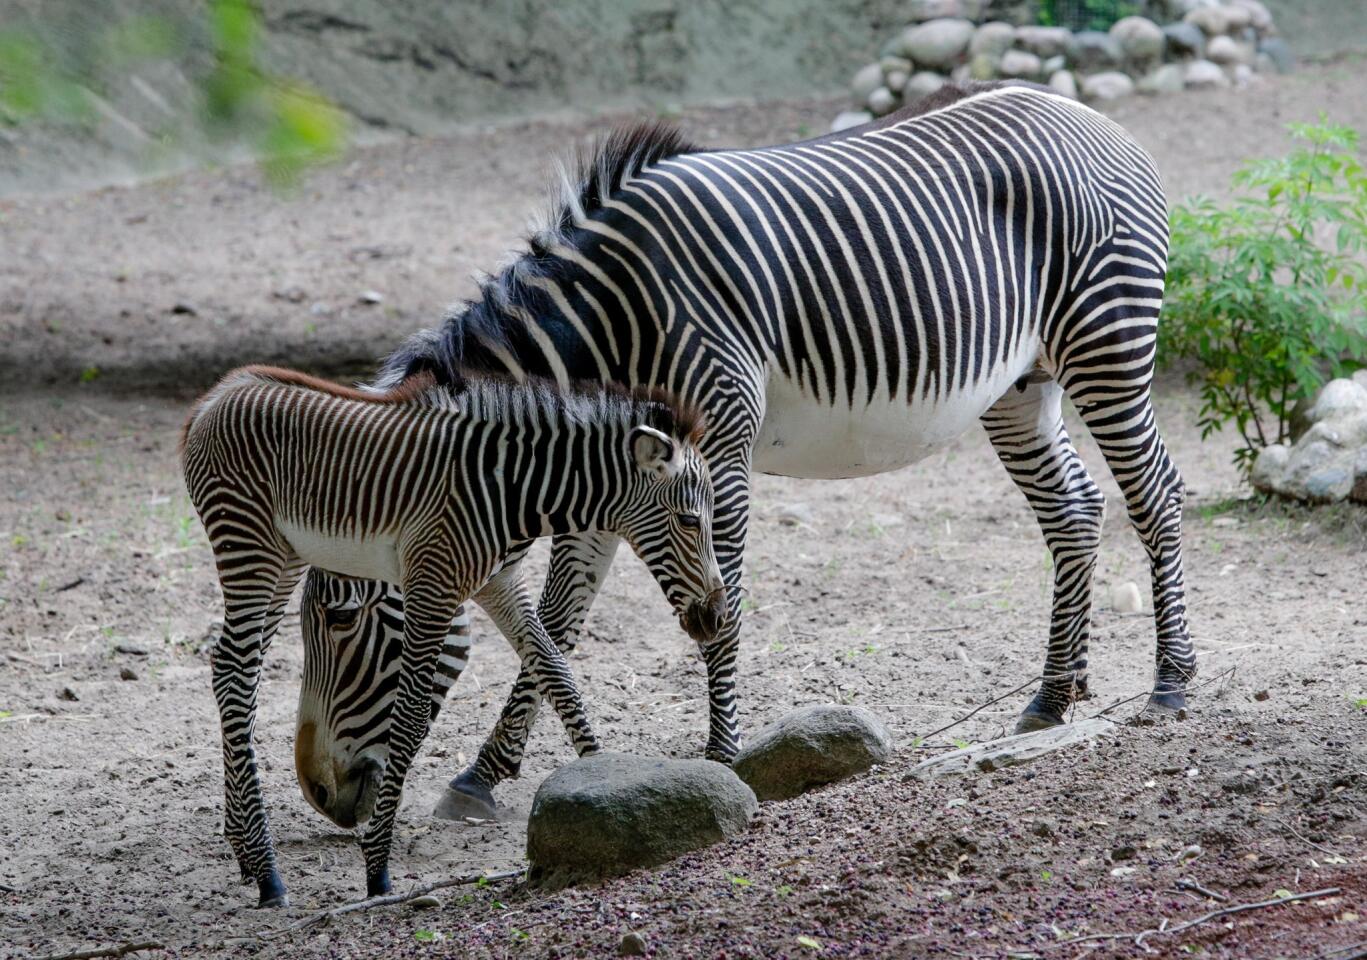 A 4-day-old Grevy's zebra stands with her mother, Adia, in their habitat at the Lincoln Park Zoo on June 22, 2016, in Chicago. The zebra is native to eastern Africa and is endangered in the wild because of hunting and habitat loss. Lincoln Park Zoo is part of a nationwide conservation effort to save the animals.